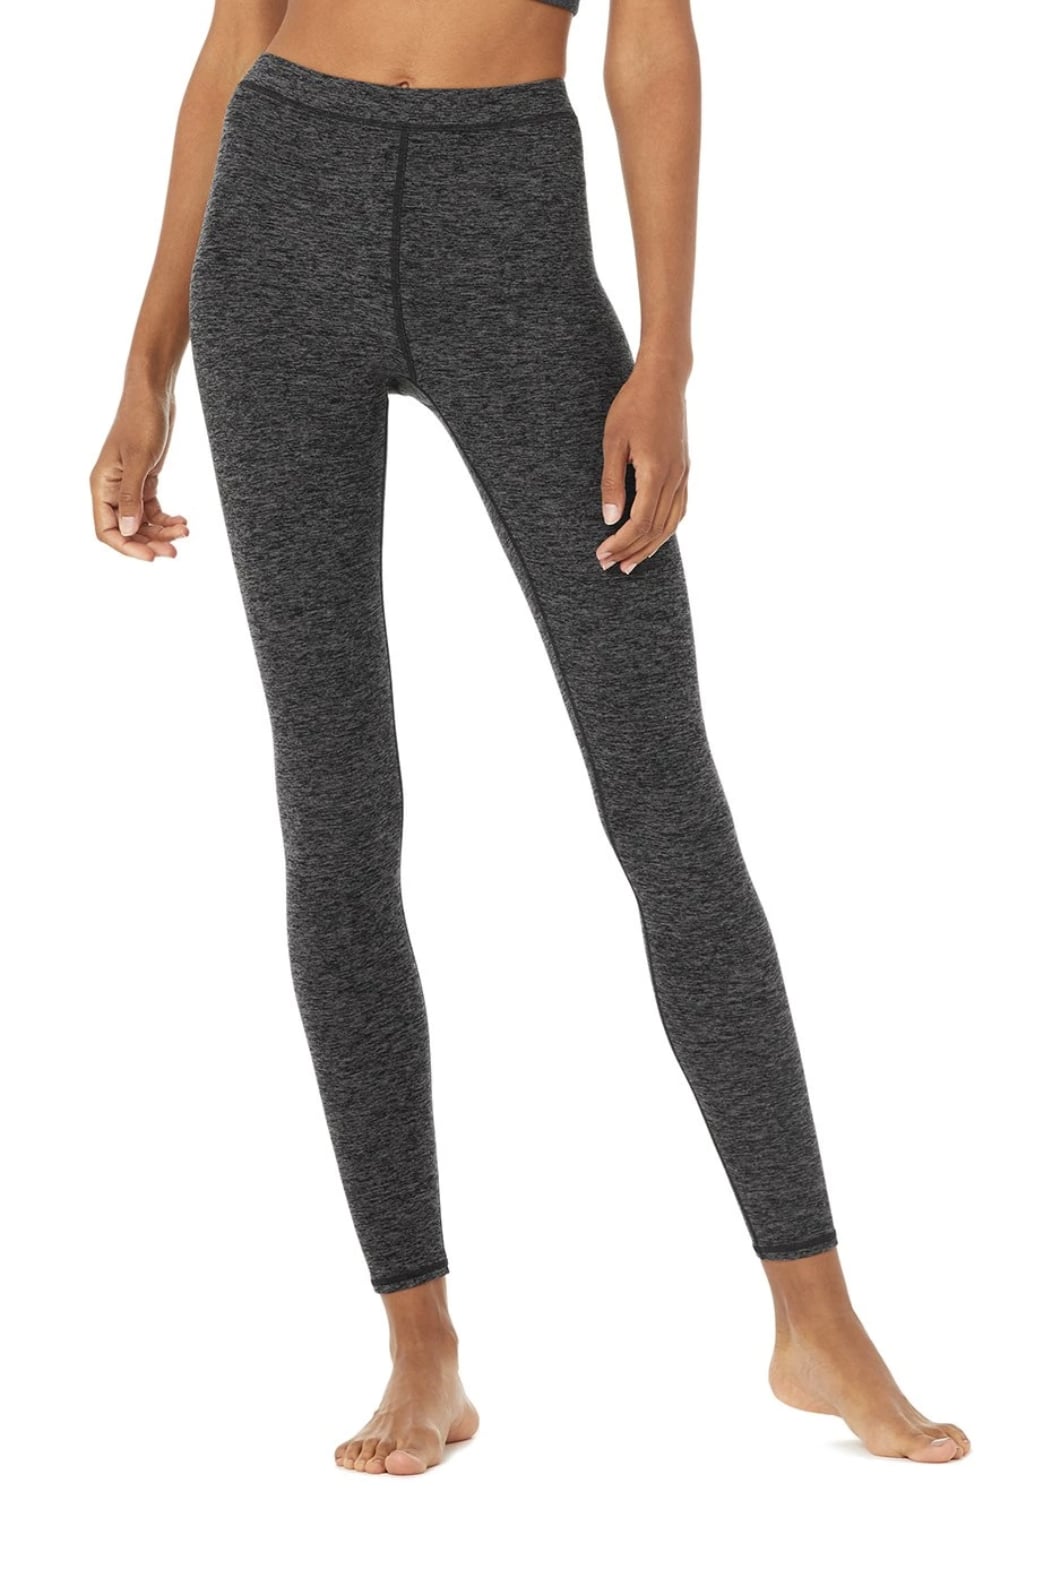 Shop Alo Yoga High-Waist Alosoft Flow Legging, Ariana Grande's Alo Yoga  Outfit Is Equal Parts Flattering, Supportive, and Stylish